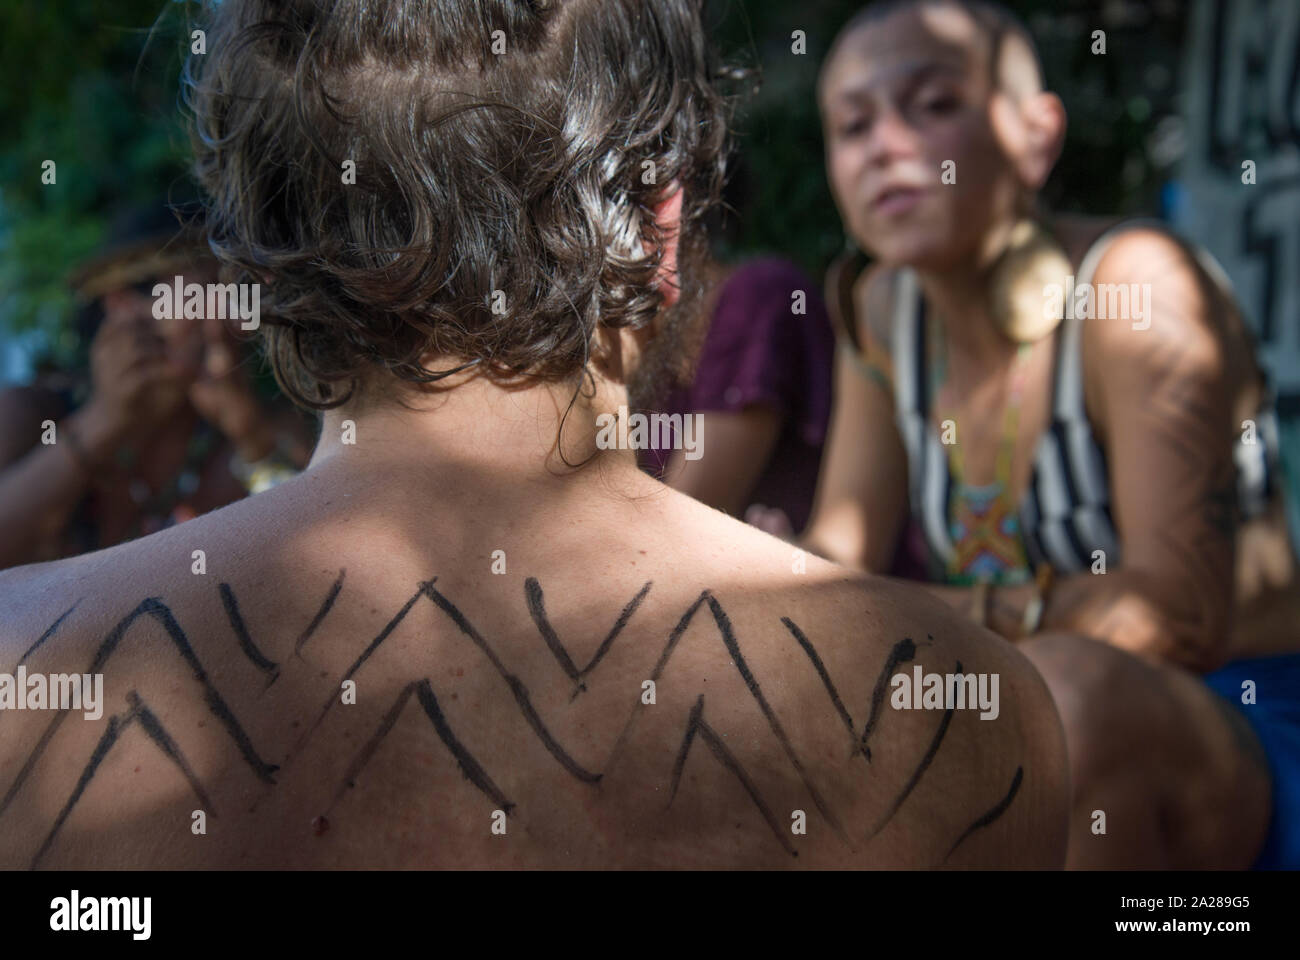 tribal-african-man-with-body-paint image - Free stock photo - Public Domain  photo - CC0 Images